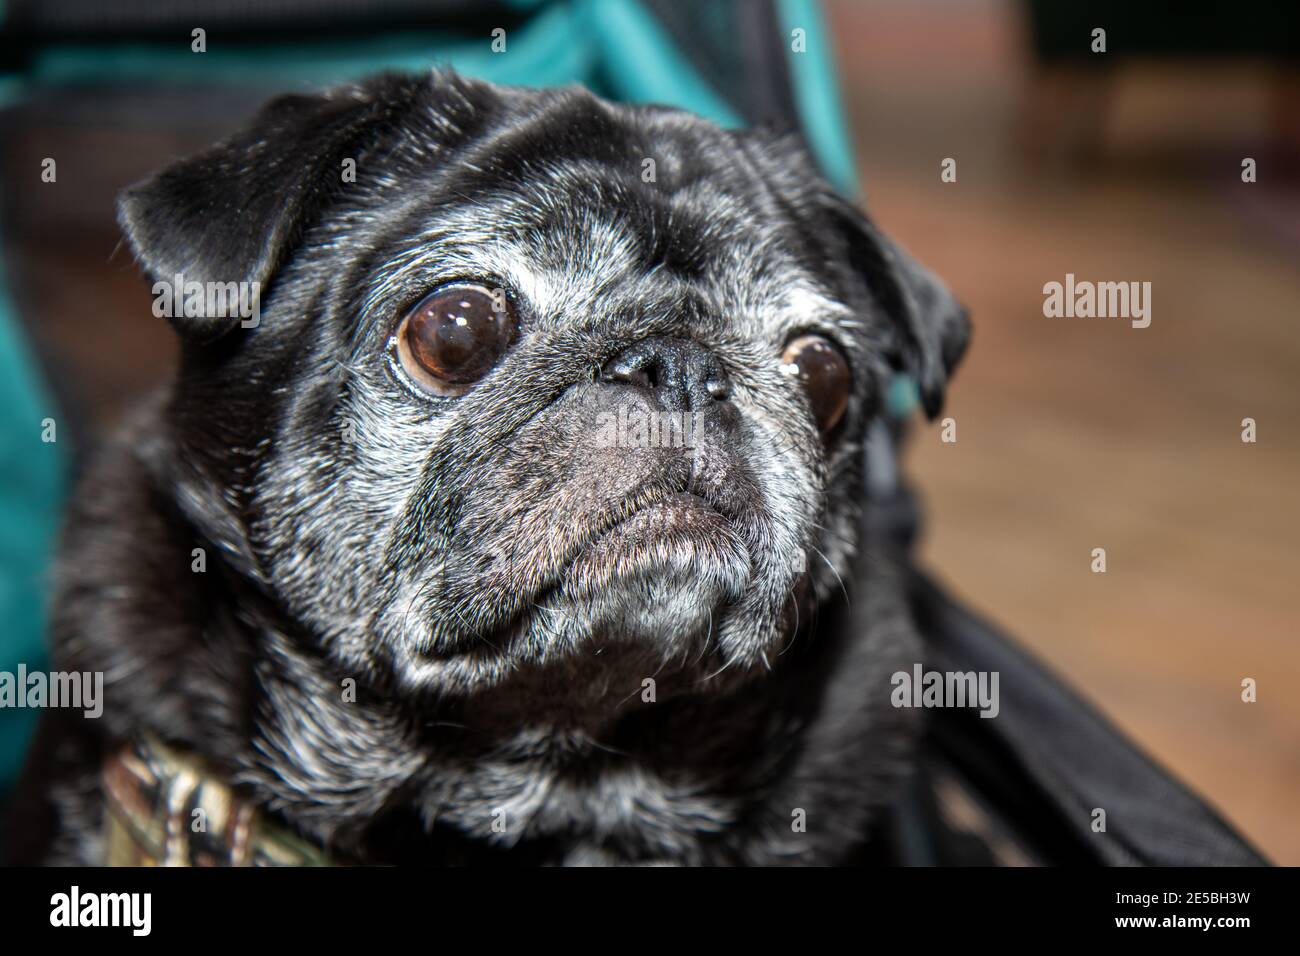 A very cute black and white pug dog looking sad Stock Photo